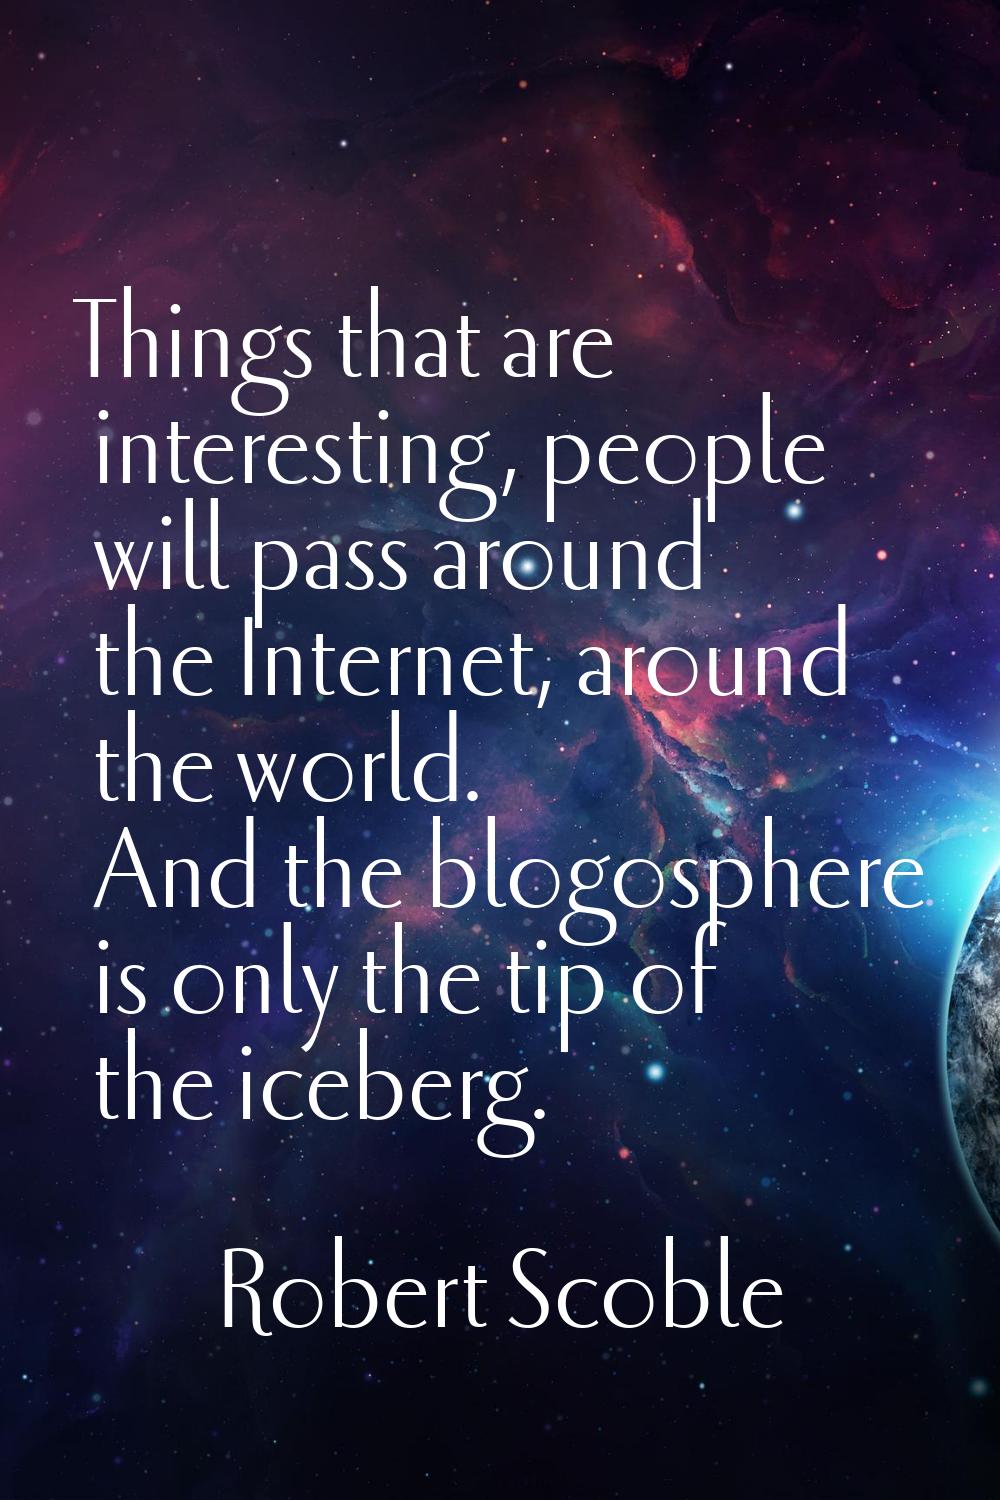 Things that are interesting, people will pass around the Internet, around the world. And the blogos